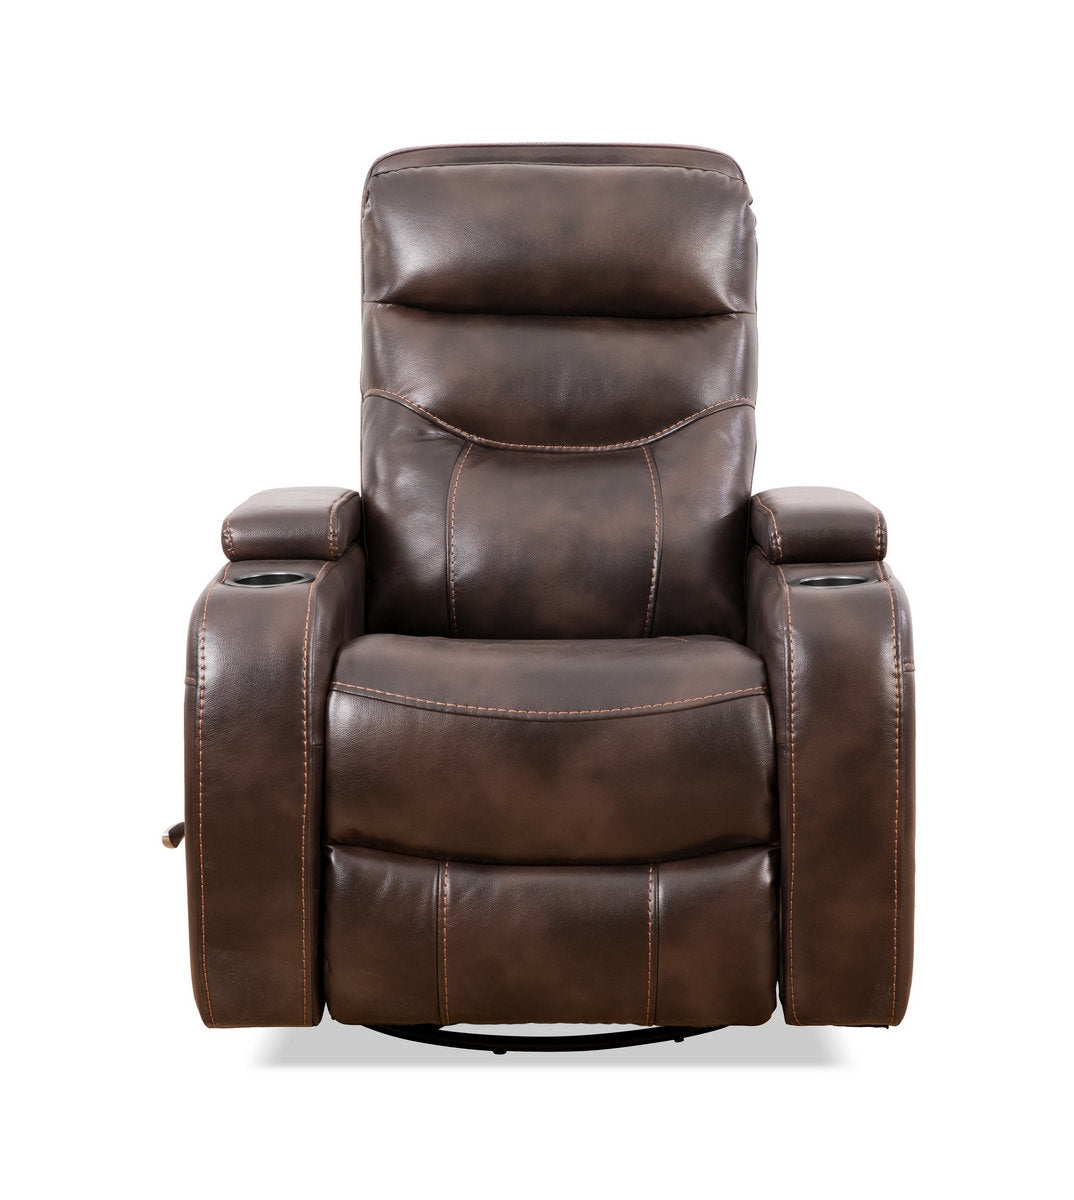 Brown PU Swivel Manual Recliner Chair with Solid Hardwood Frame